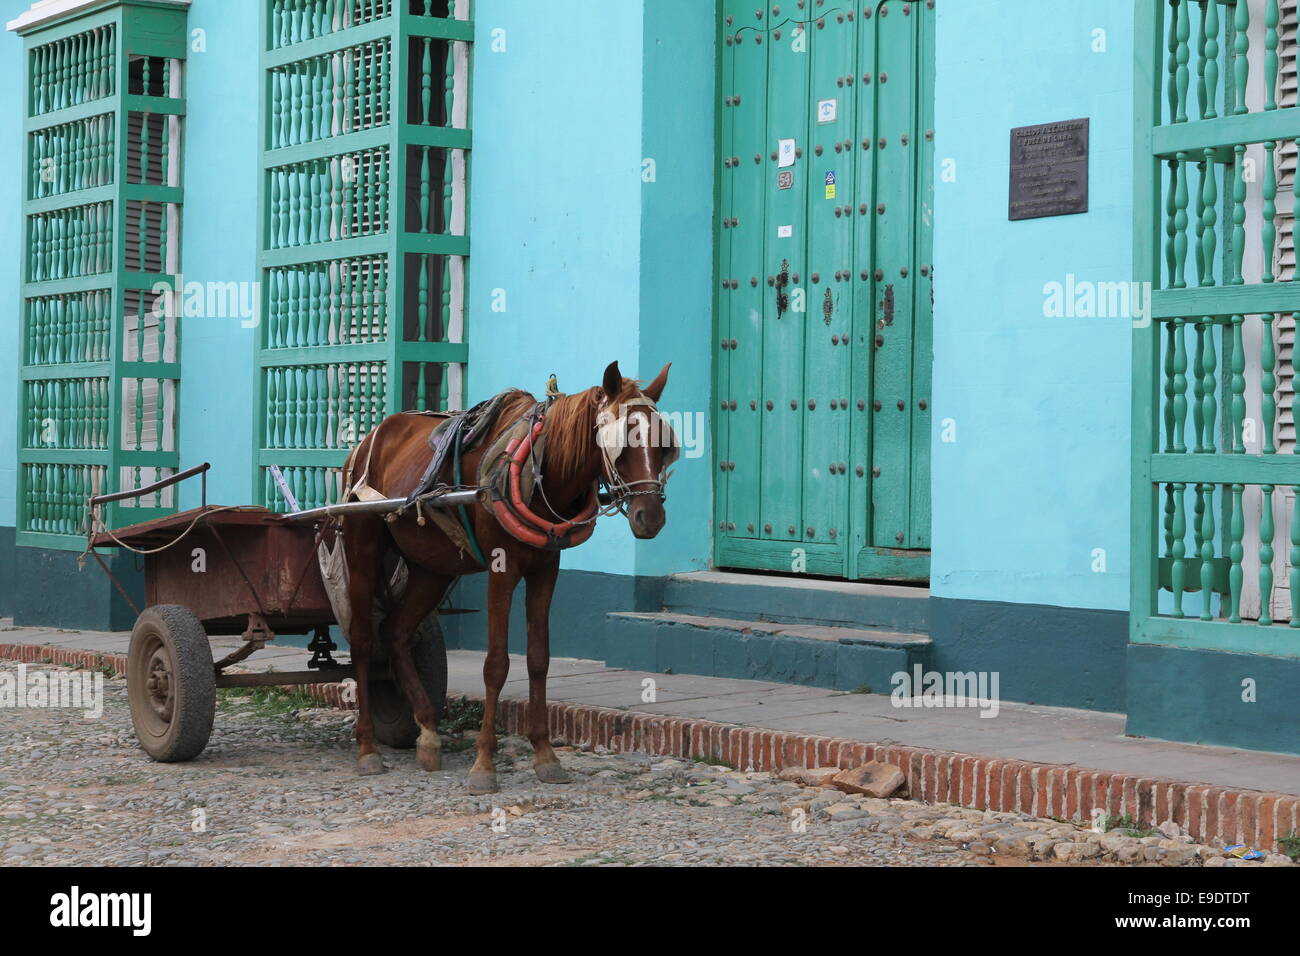 Horse and Cart outside turquoise building Trinidad Cuba Stock Photo